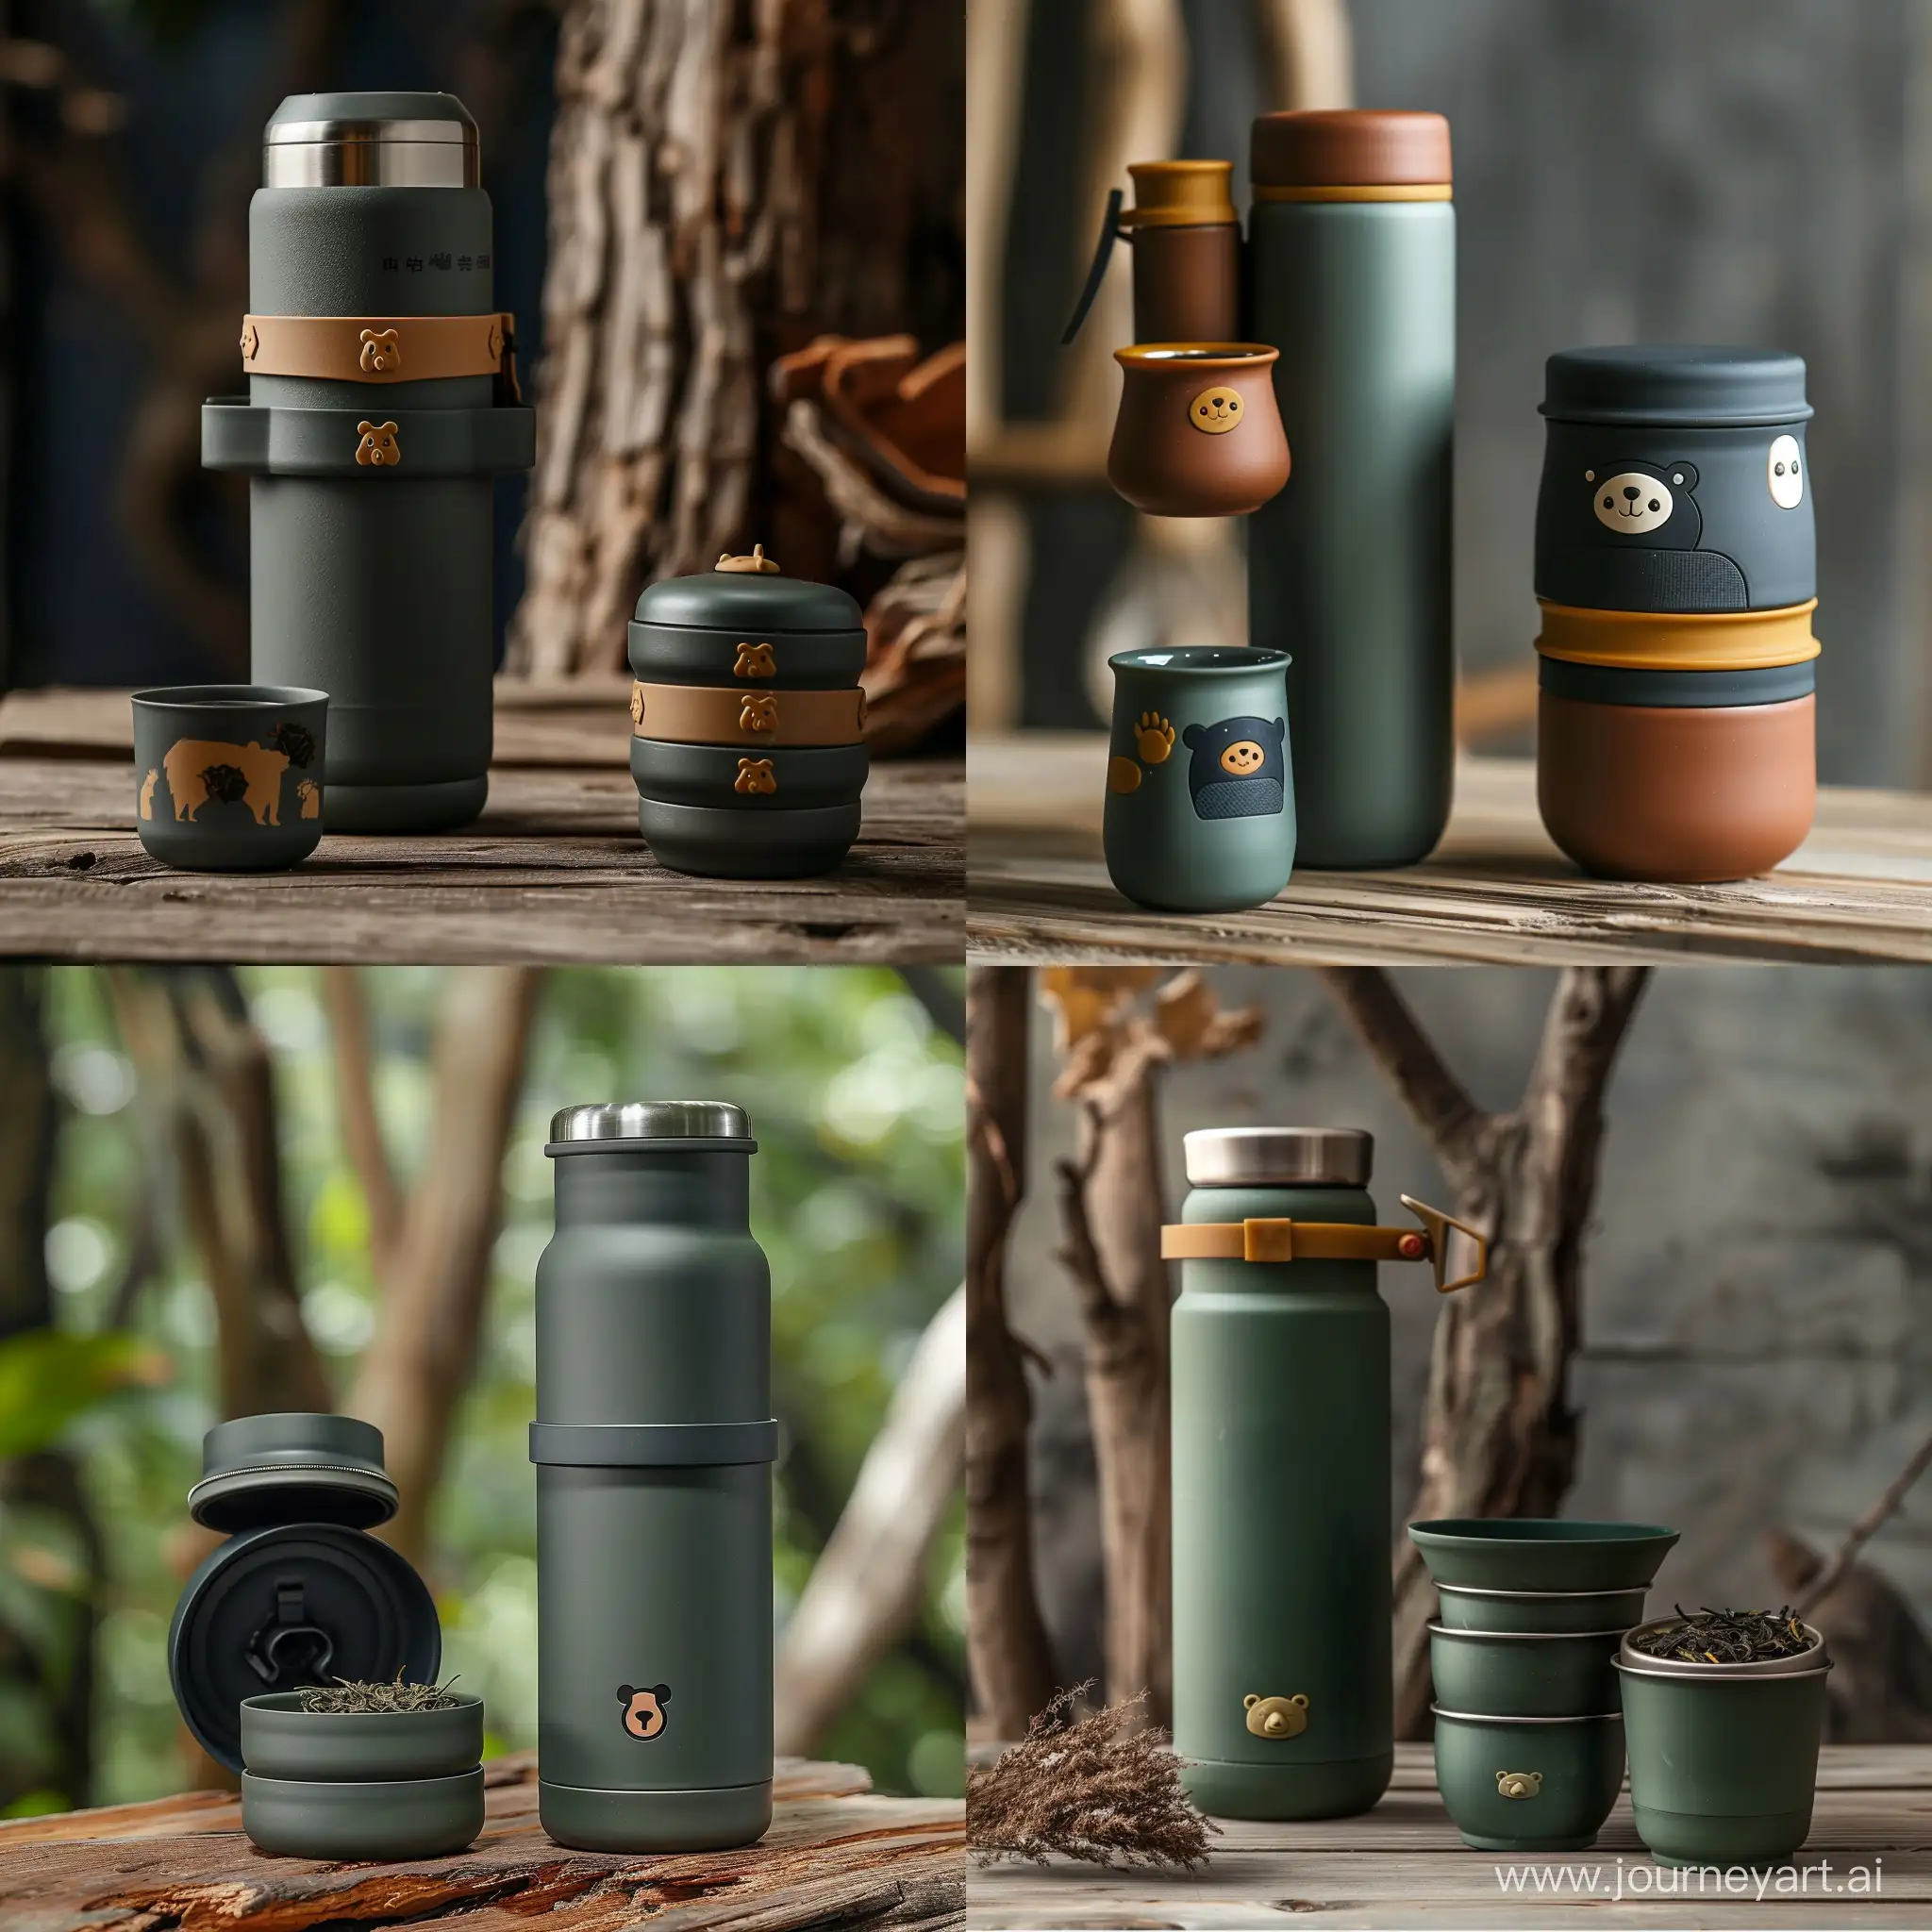 Dimensions is Height approximately 15cm, Diameter around 8cm, Travel thermos flask and tea cup material will made of Stainless steel and PP plastic lid,Travel thermos flask and cups should be stackable for storage, possibly from the bottom or top, Include a special compartment for storing tea leaves, Implement a camping-style folding handle design, Incorporate the theme of the Taiwanese black bear into the design, particularly on the cup lid